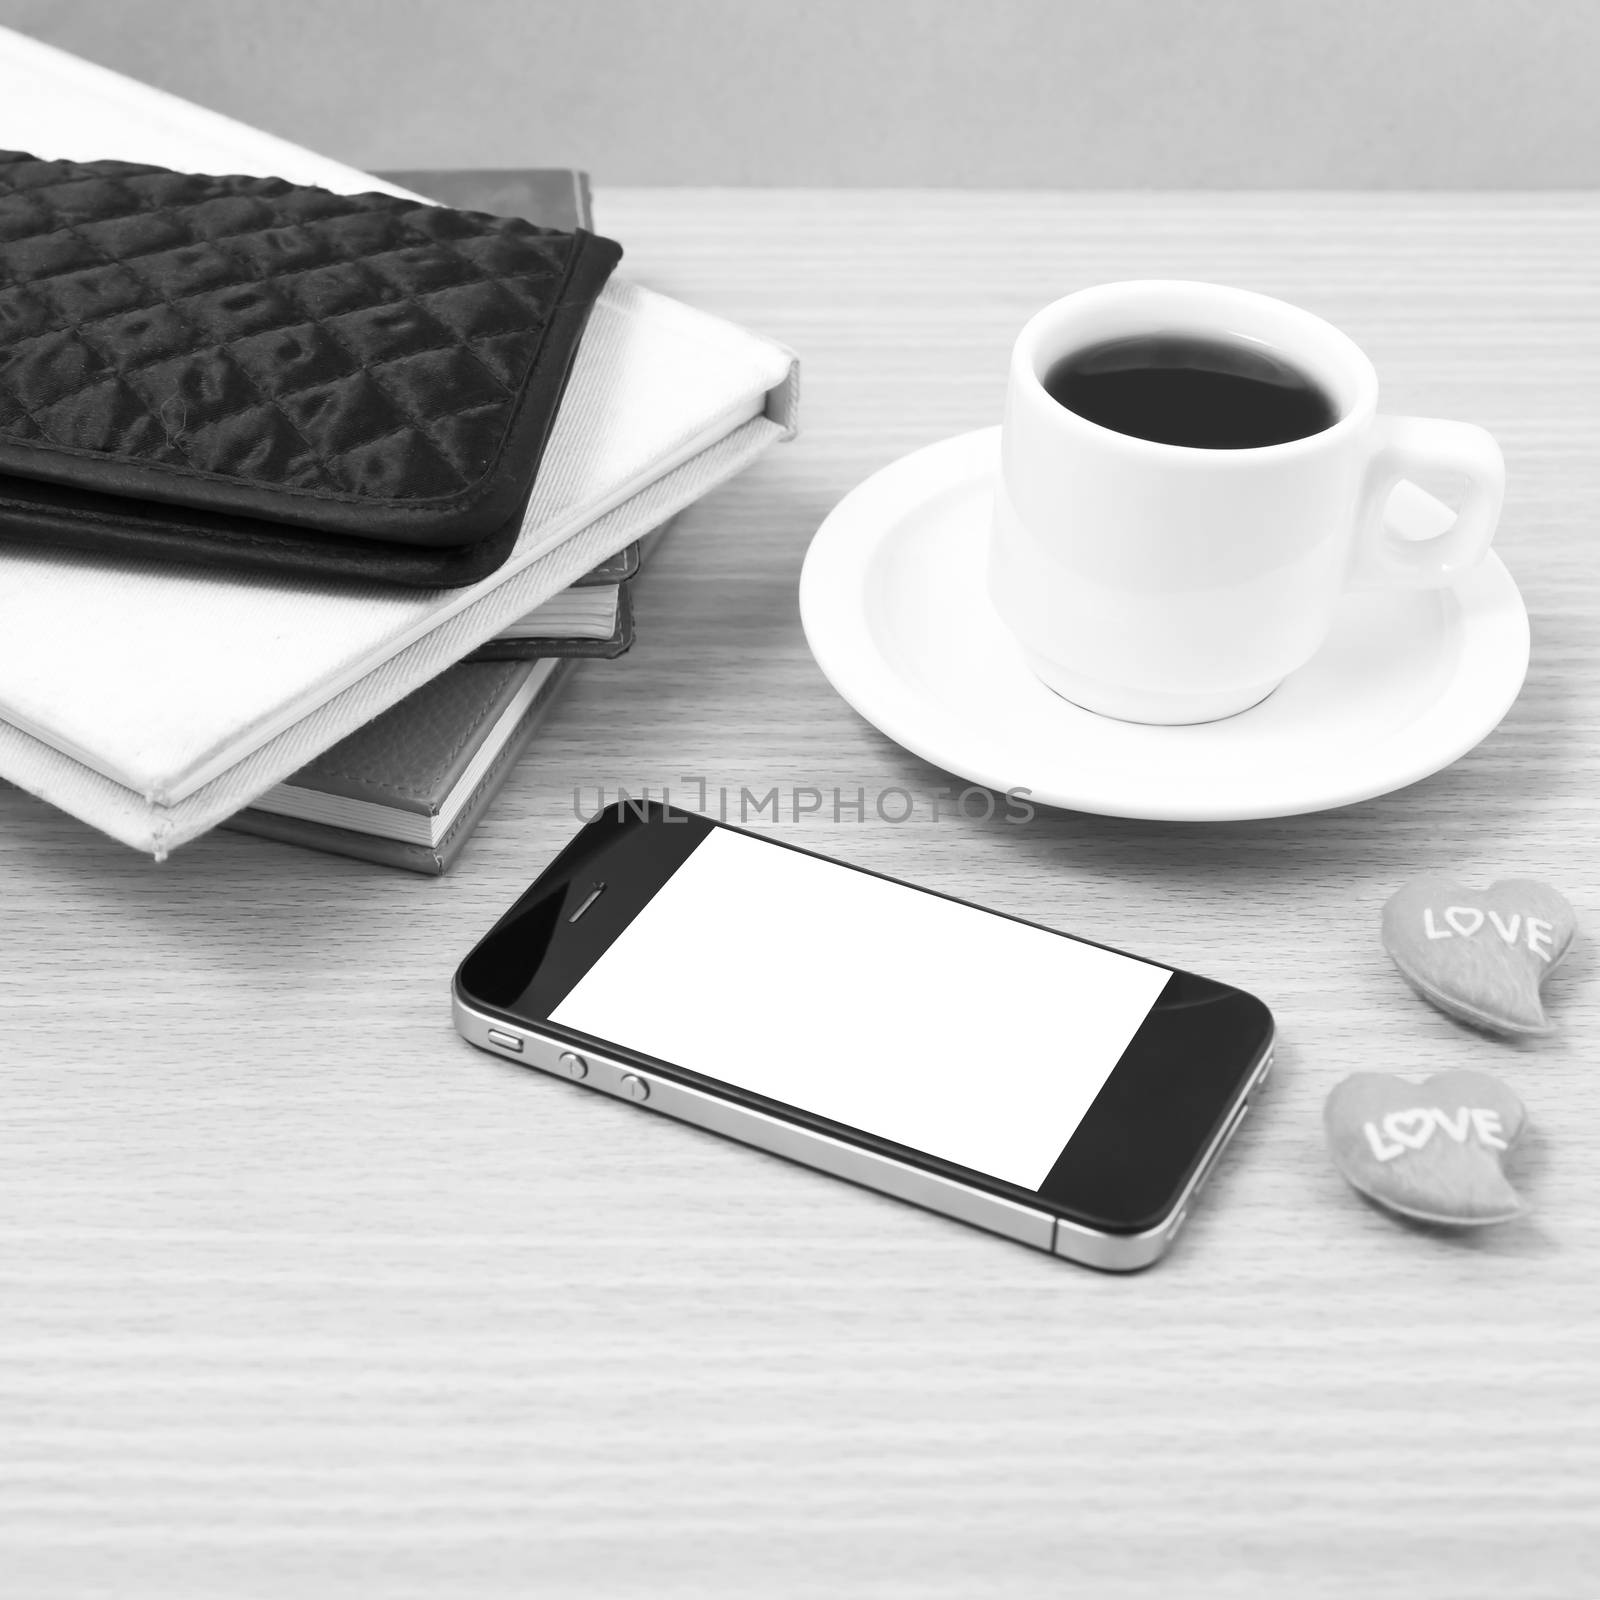 office desk : coffee with phone,heart,stack of book,wallet on wood background black and white color